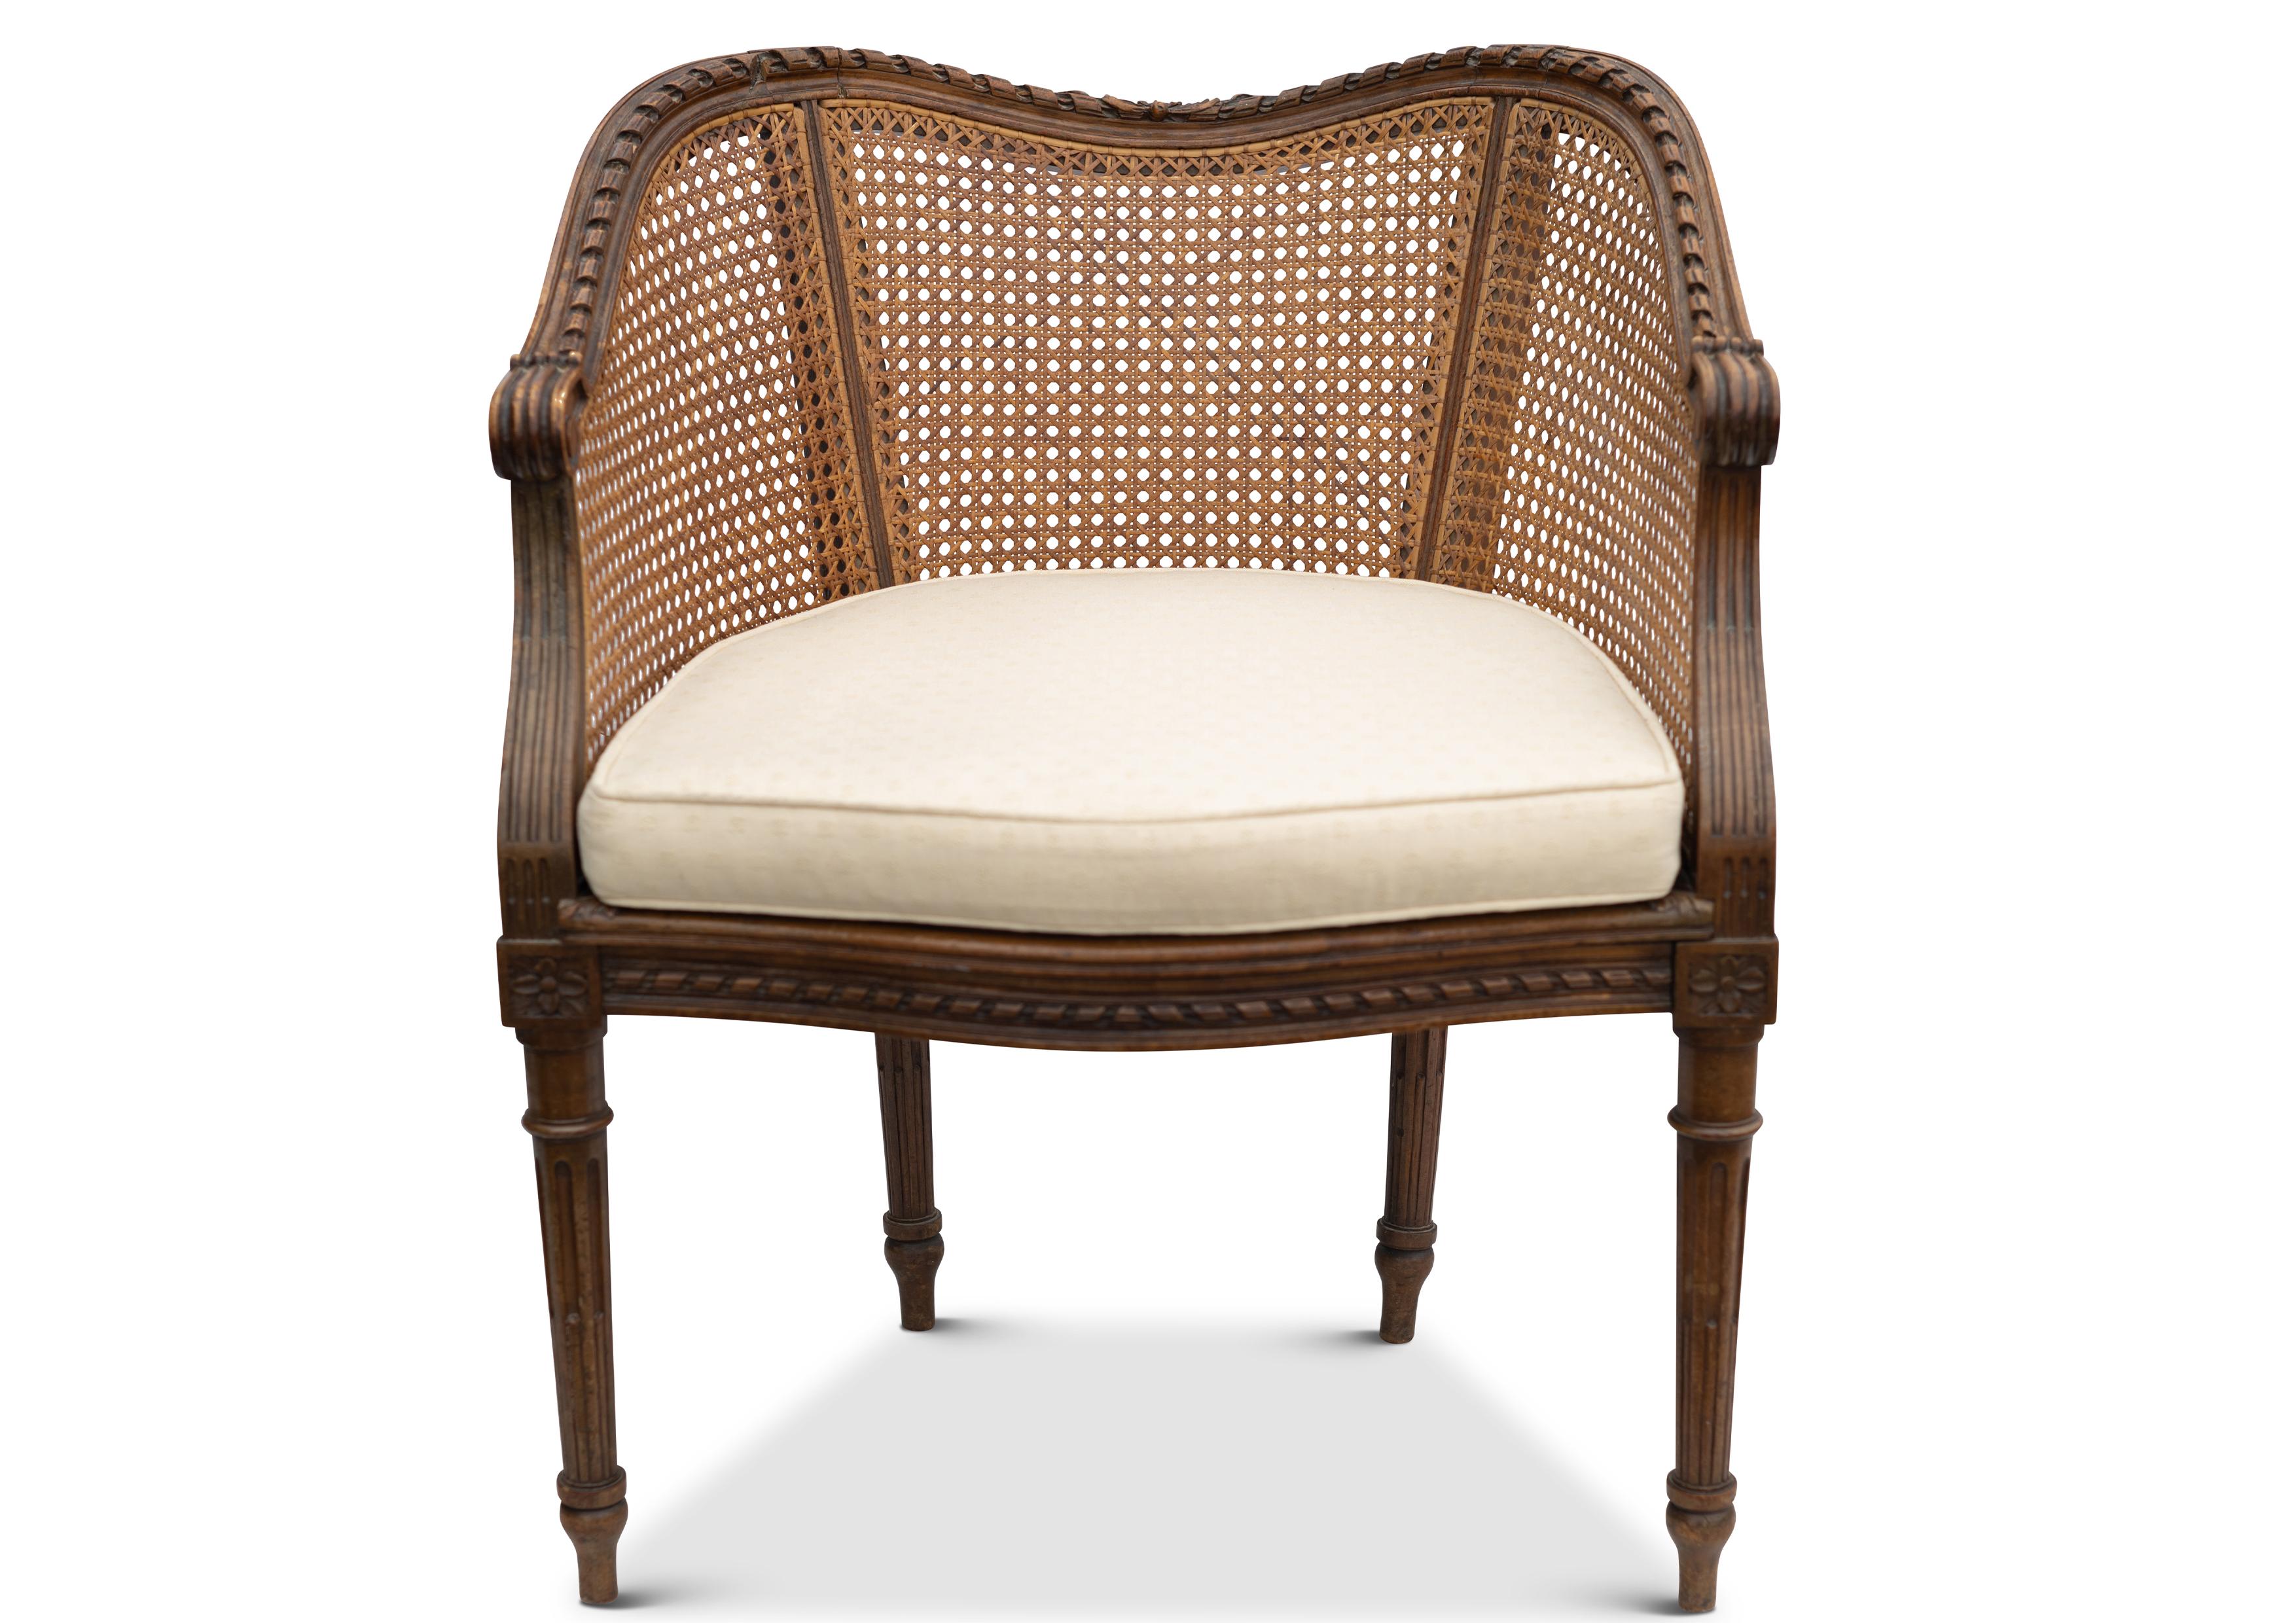 Early 20th century Bergère Beech Decorative Carved Armchair With Cream Upholstered Seat Upon Empire Legs circa 1900s 

Height to arms 60cm.